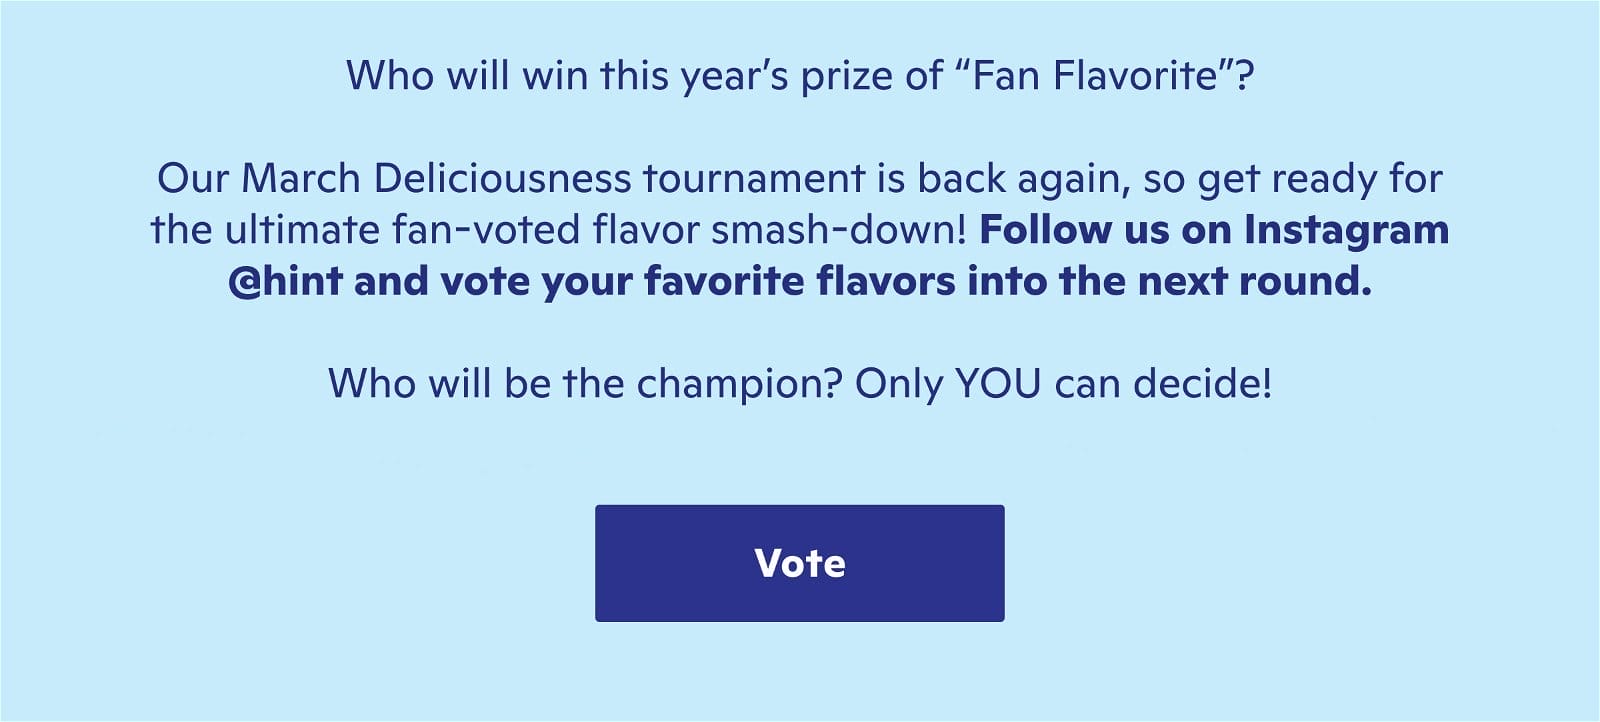 Who will win? Follow us on Instagram @hint and vote for your favorite flavors into the next round.